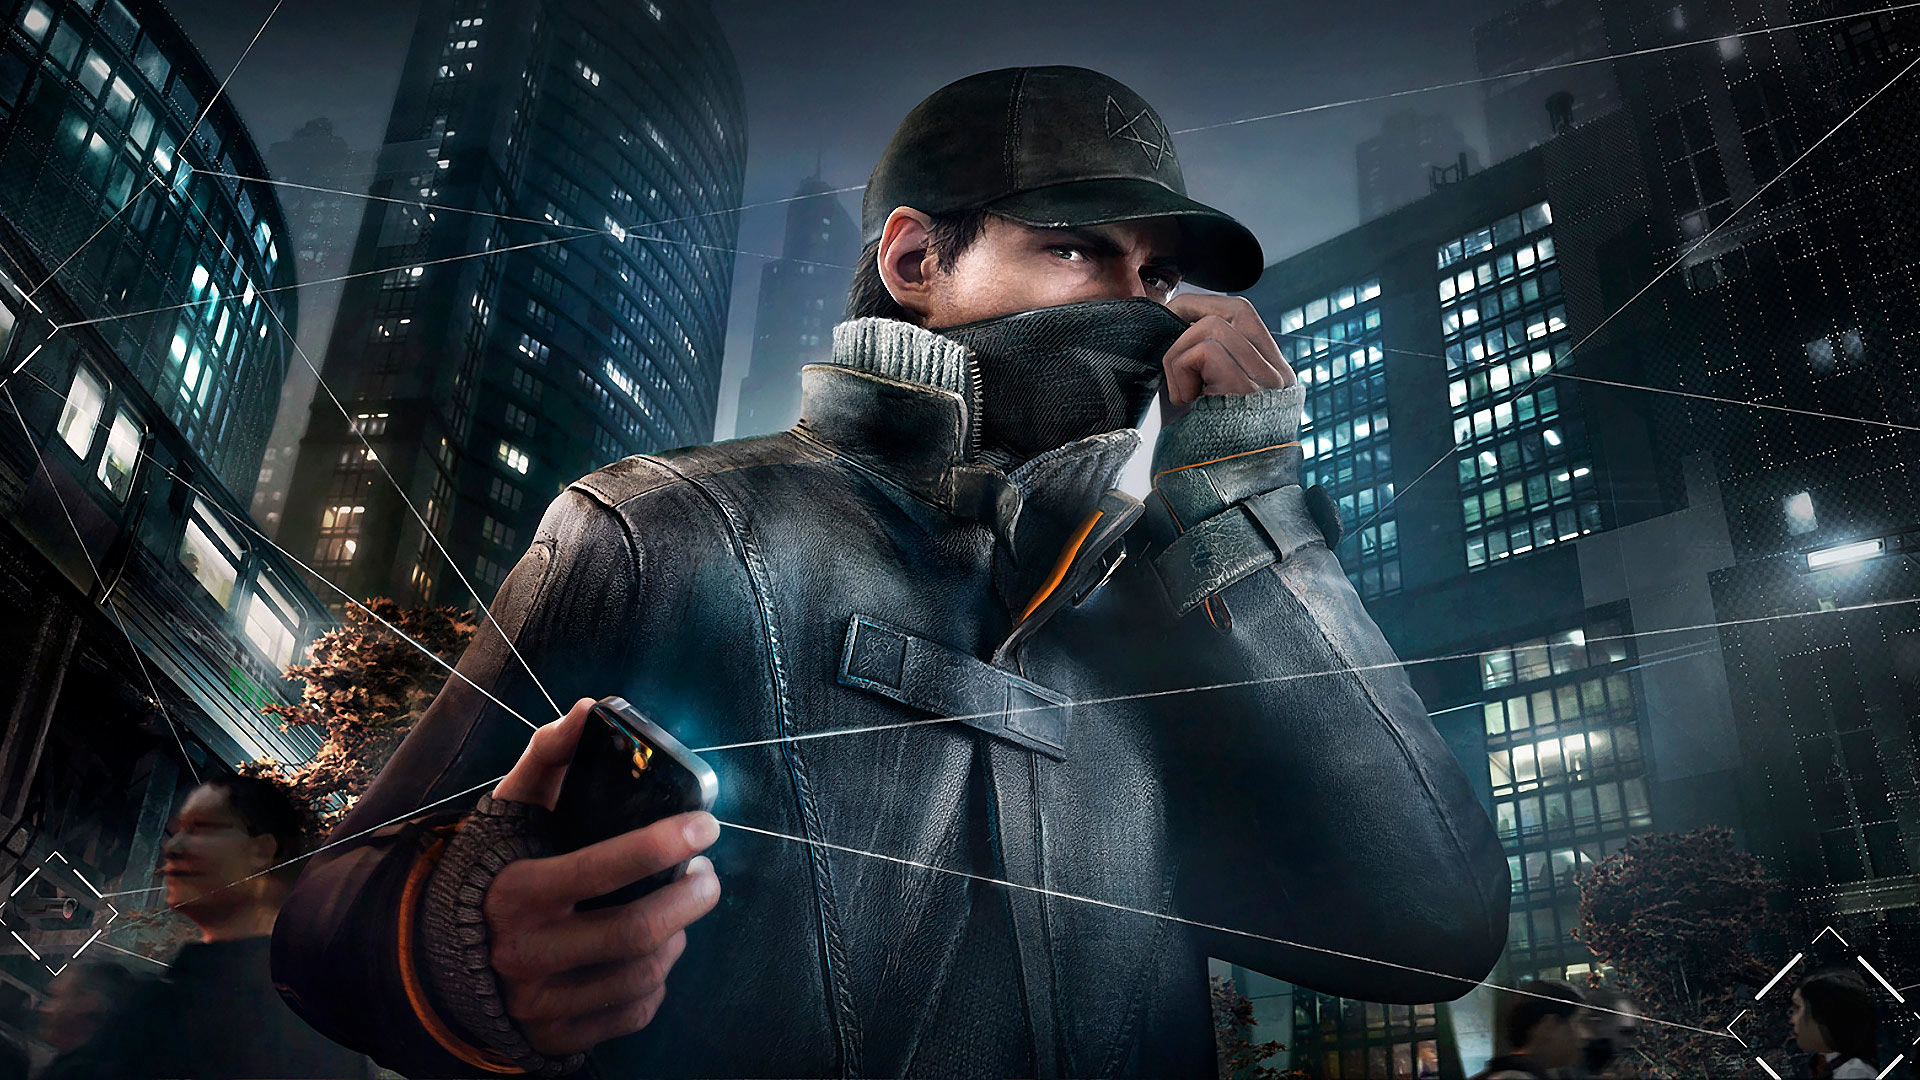 Watch Dogs #15